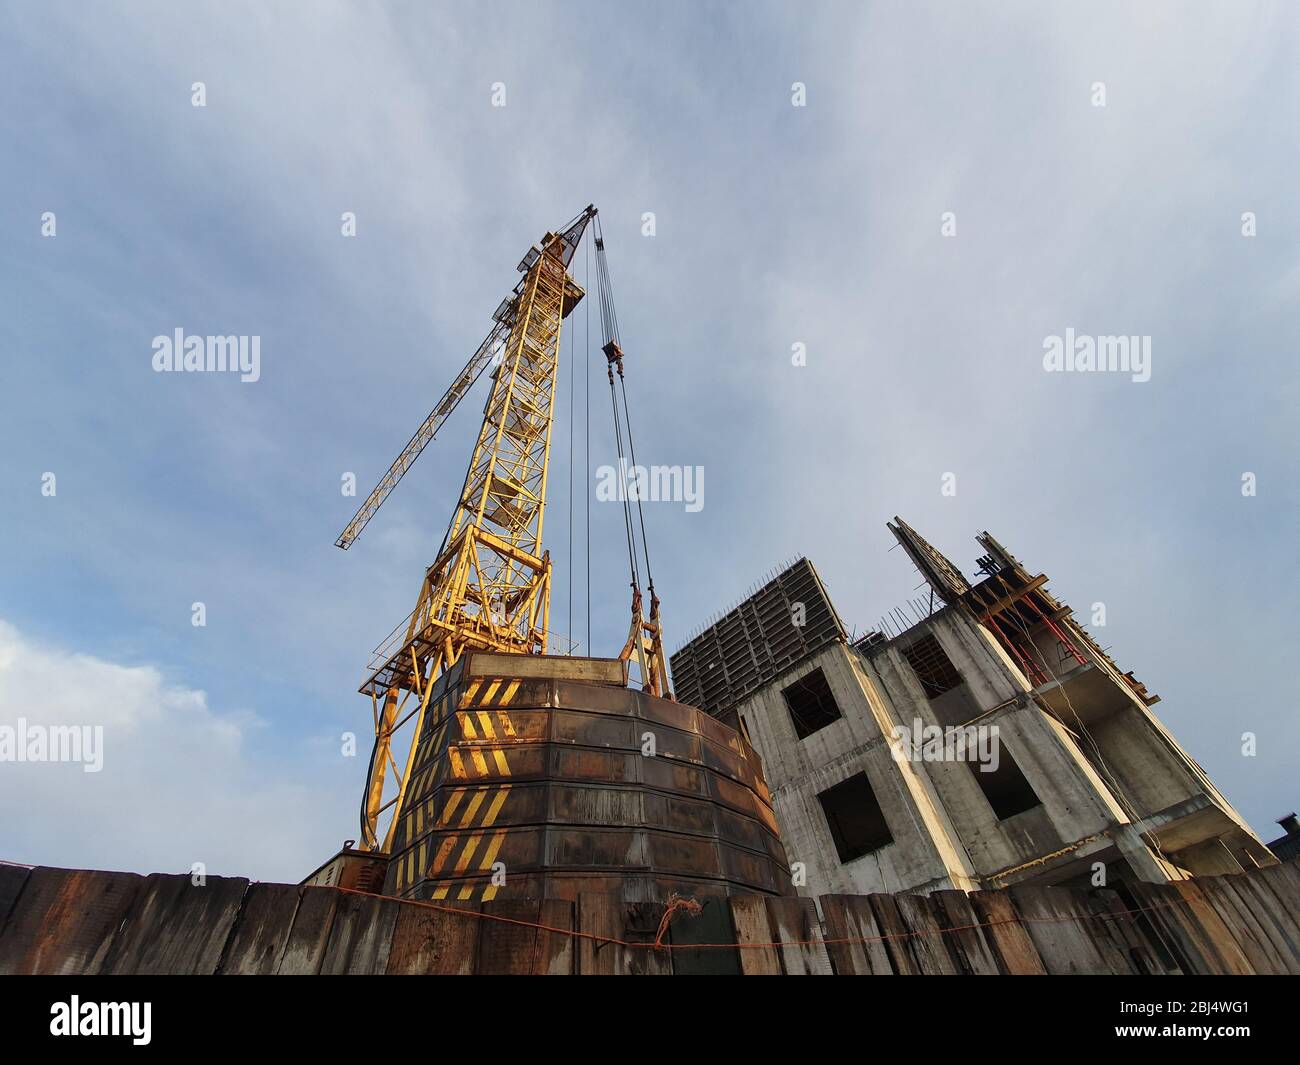 The construction of a monolithic residential building. A large crane stands next to a multi-storey building, which has not yet been completed. Stock Photo